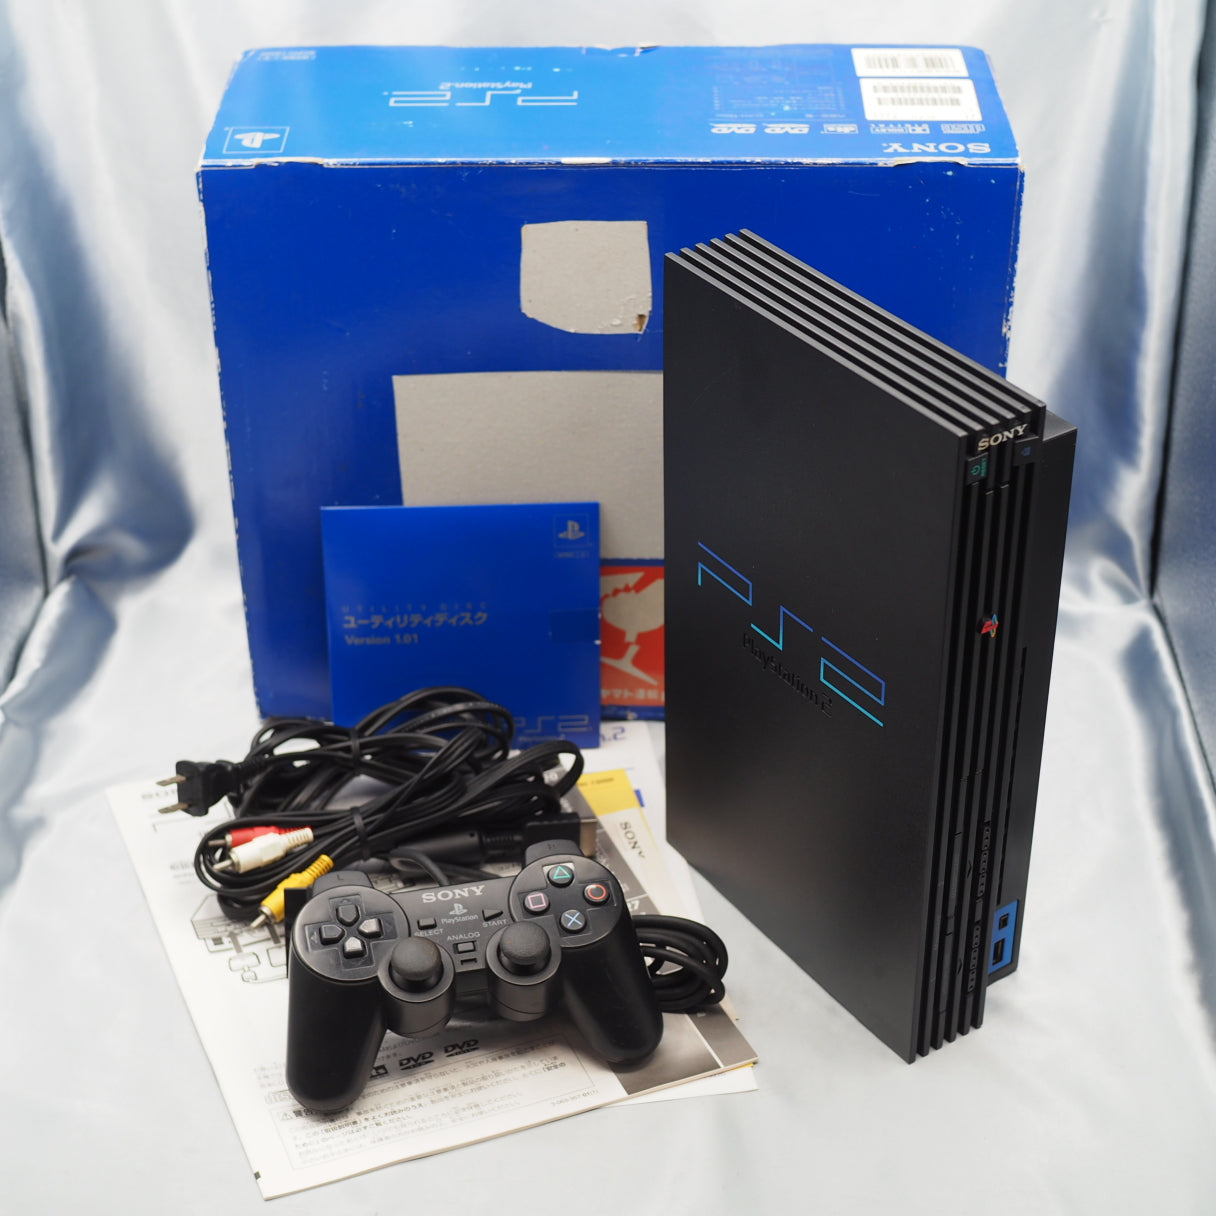 Sony PlayStation2 SCPH-30000 Boxed [Black] [Serial number match]